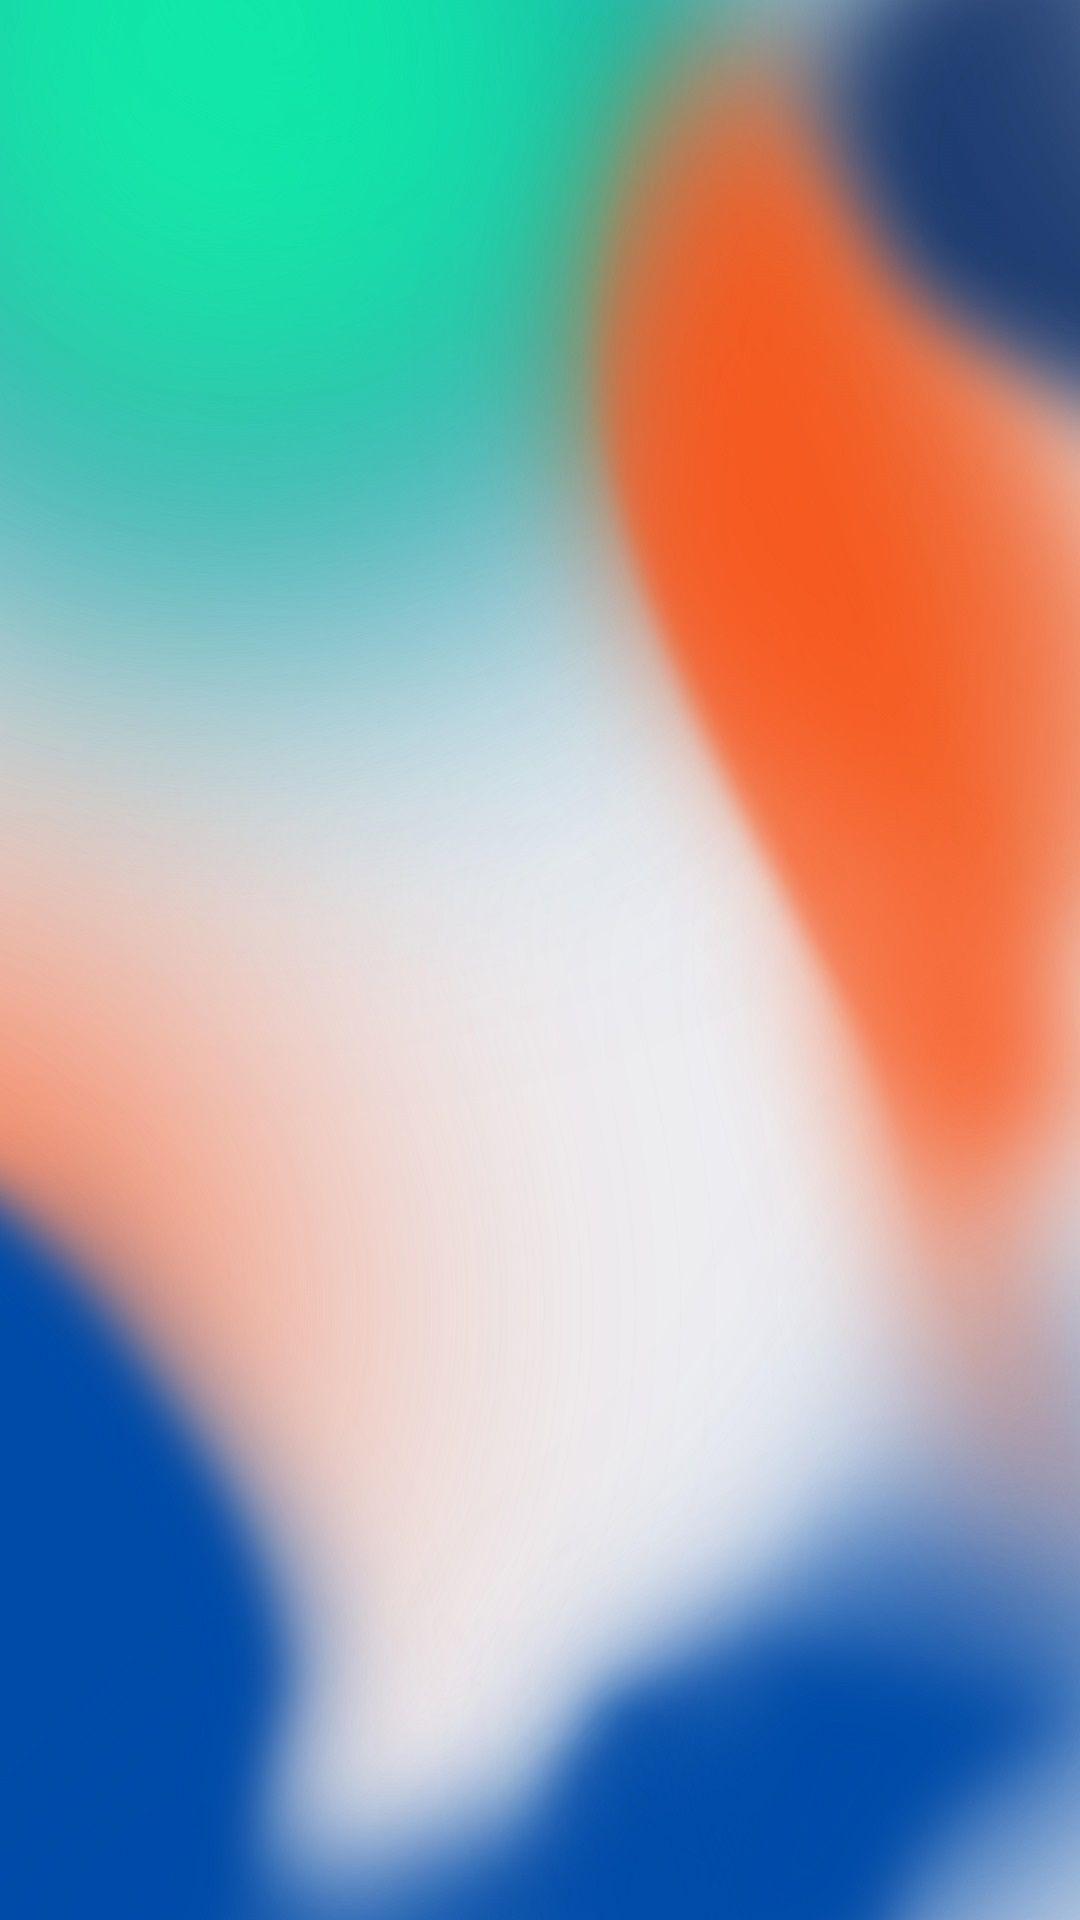 iPhone X wall 1080 x 1920 Wallpaper available for free download